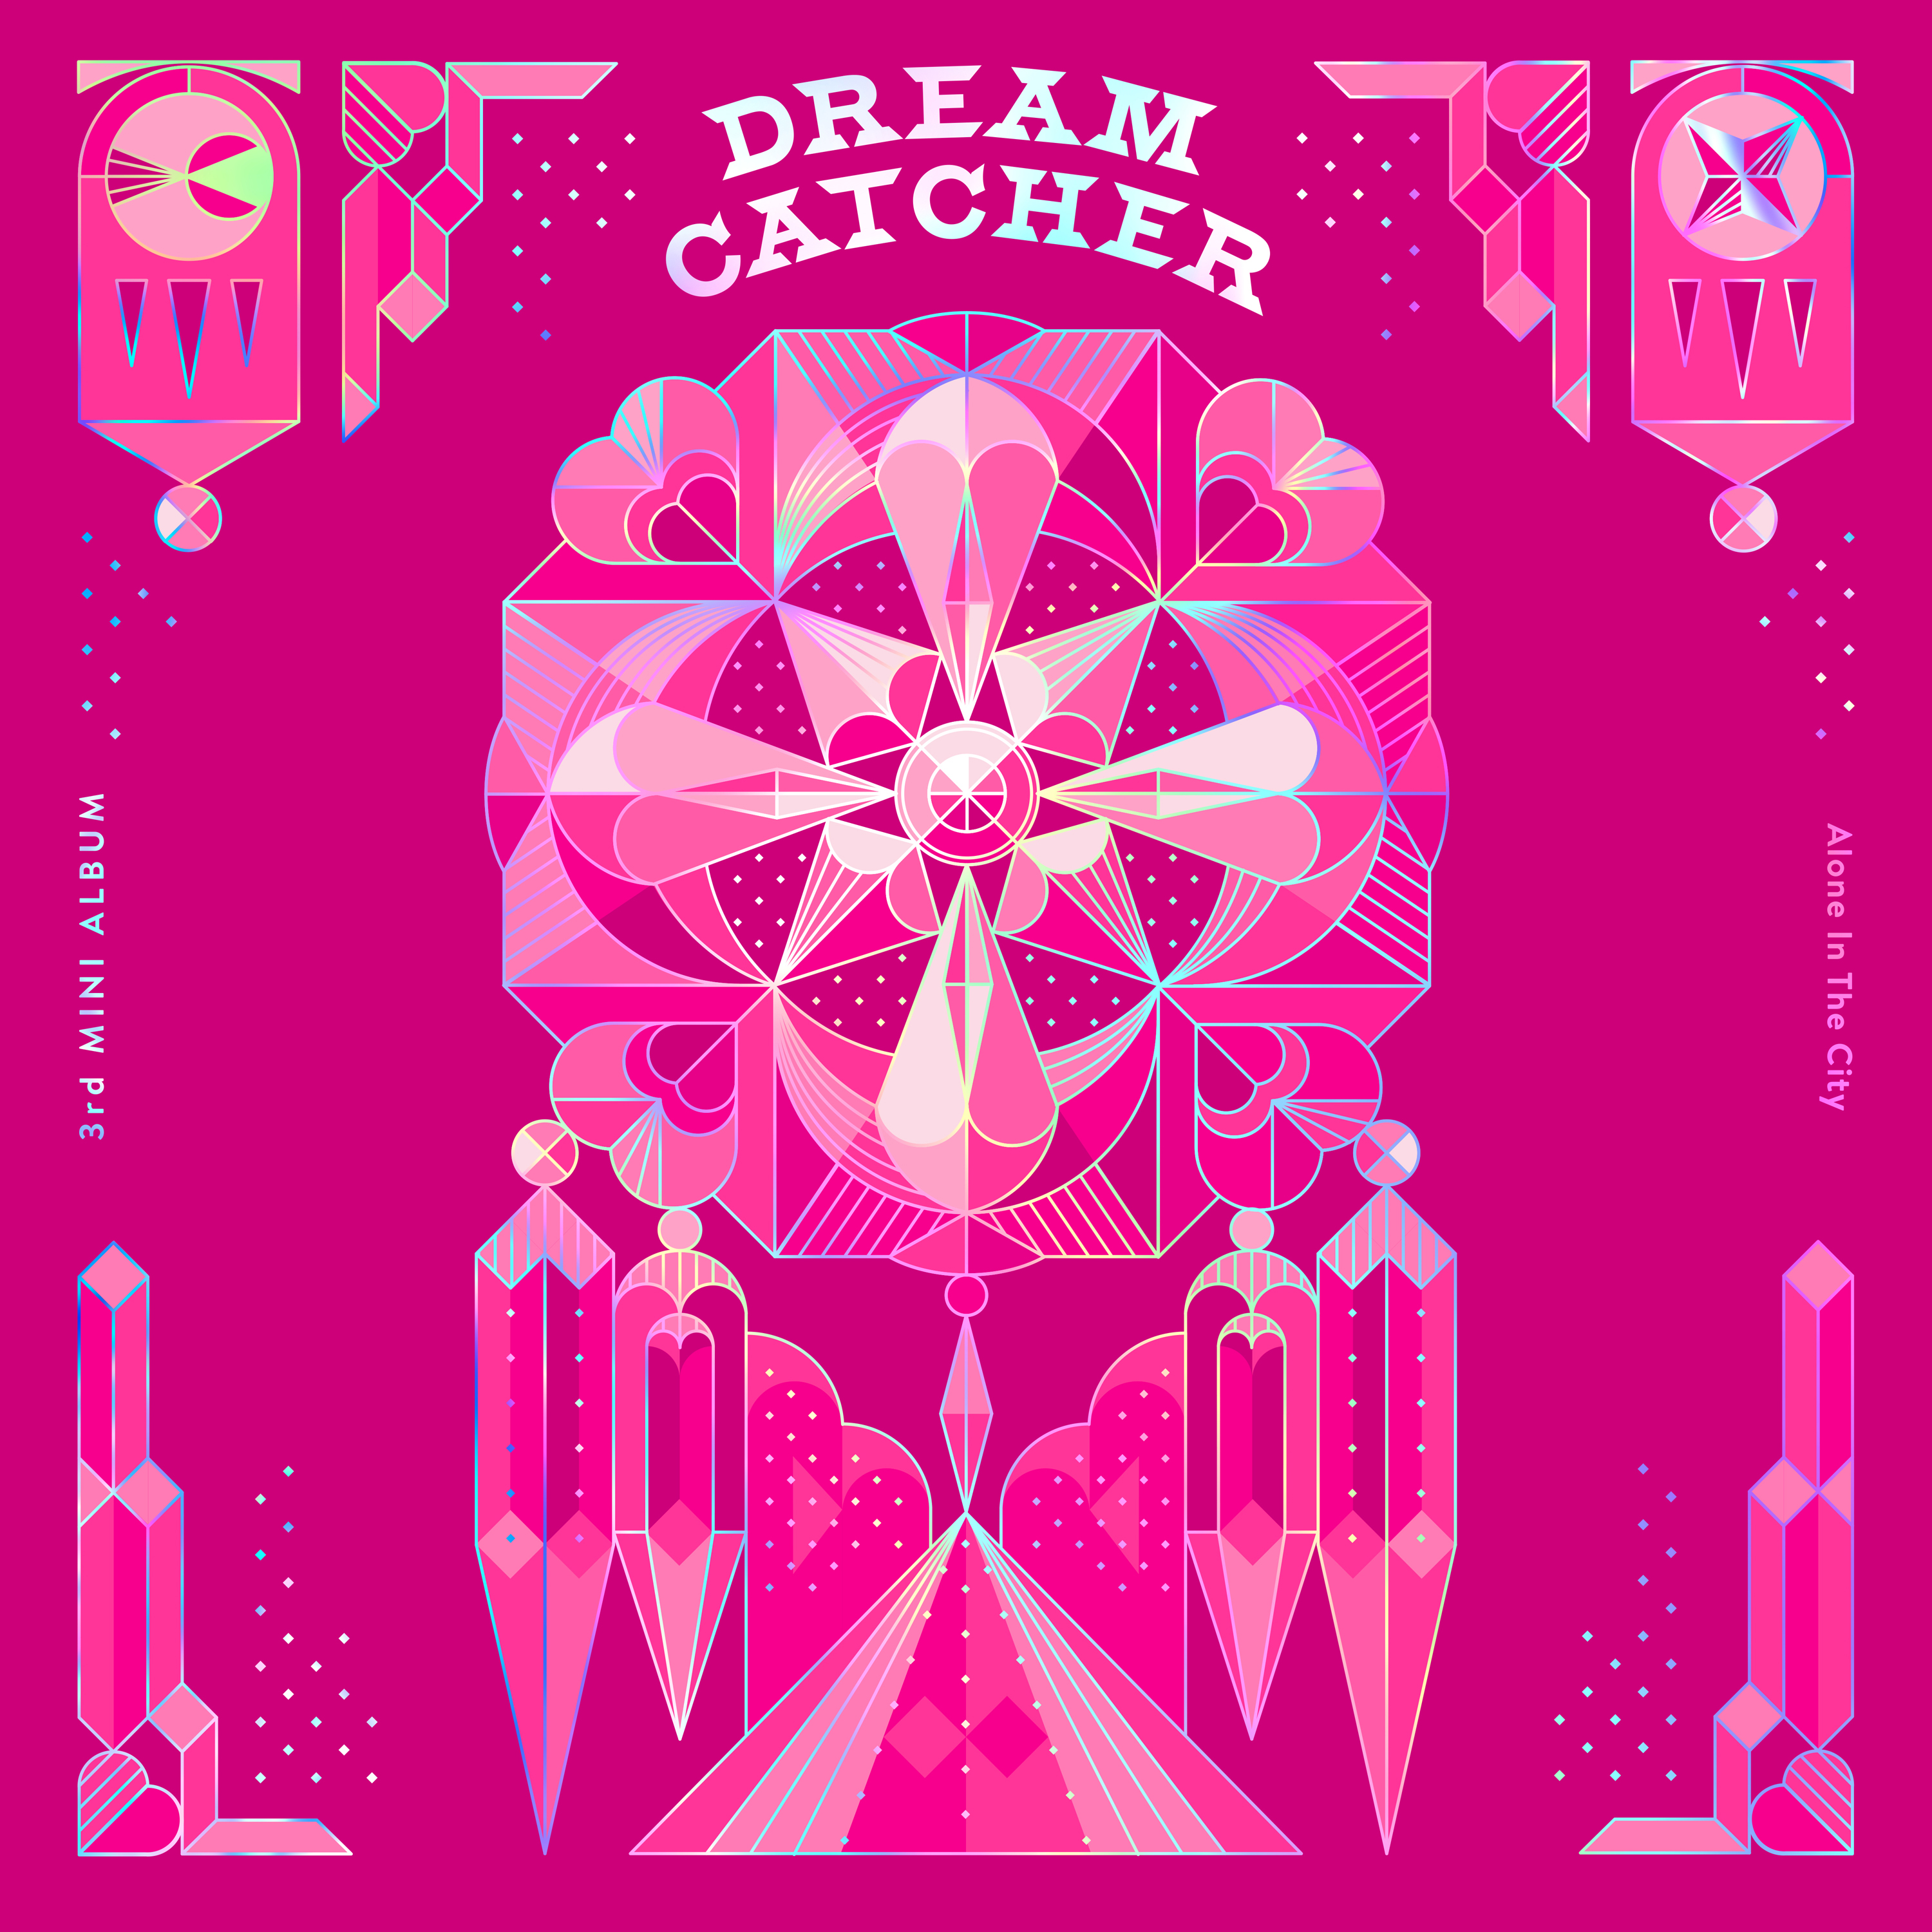 20180925.0745.01 Dreamcatcher - Alone in the City (FLAC) cover.jpg